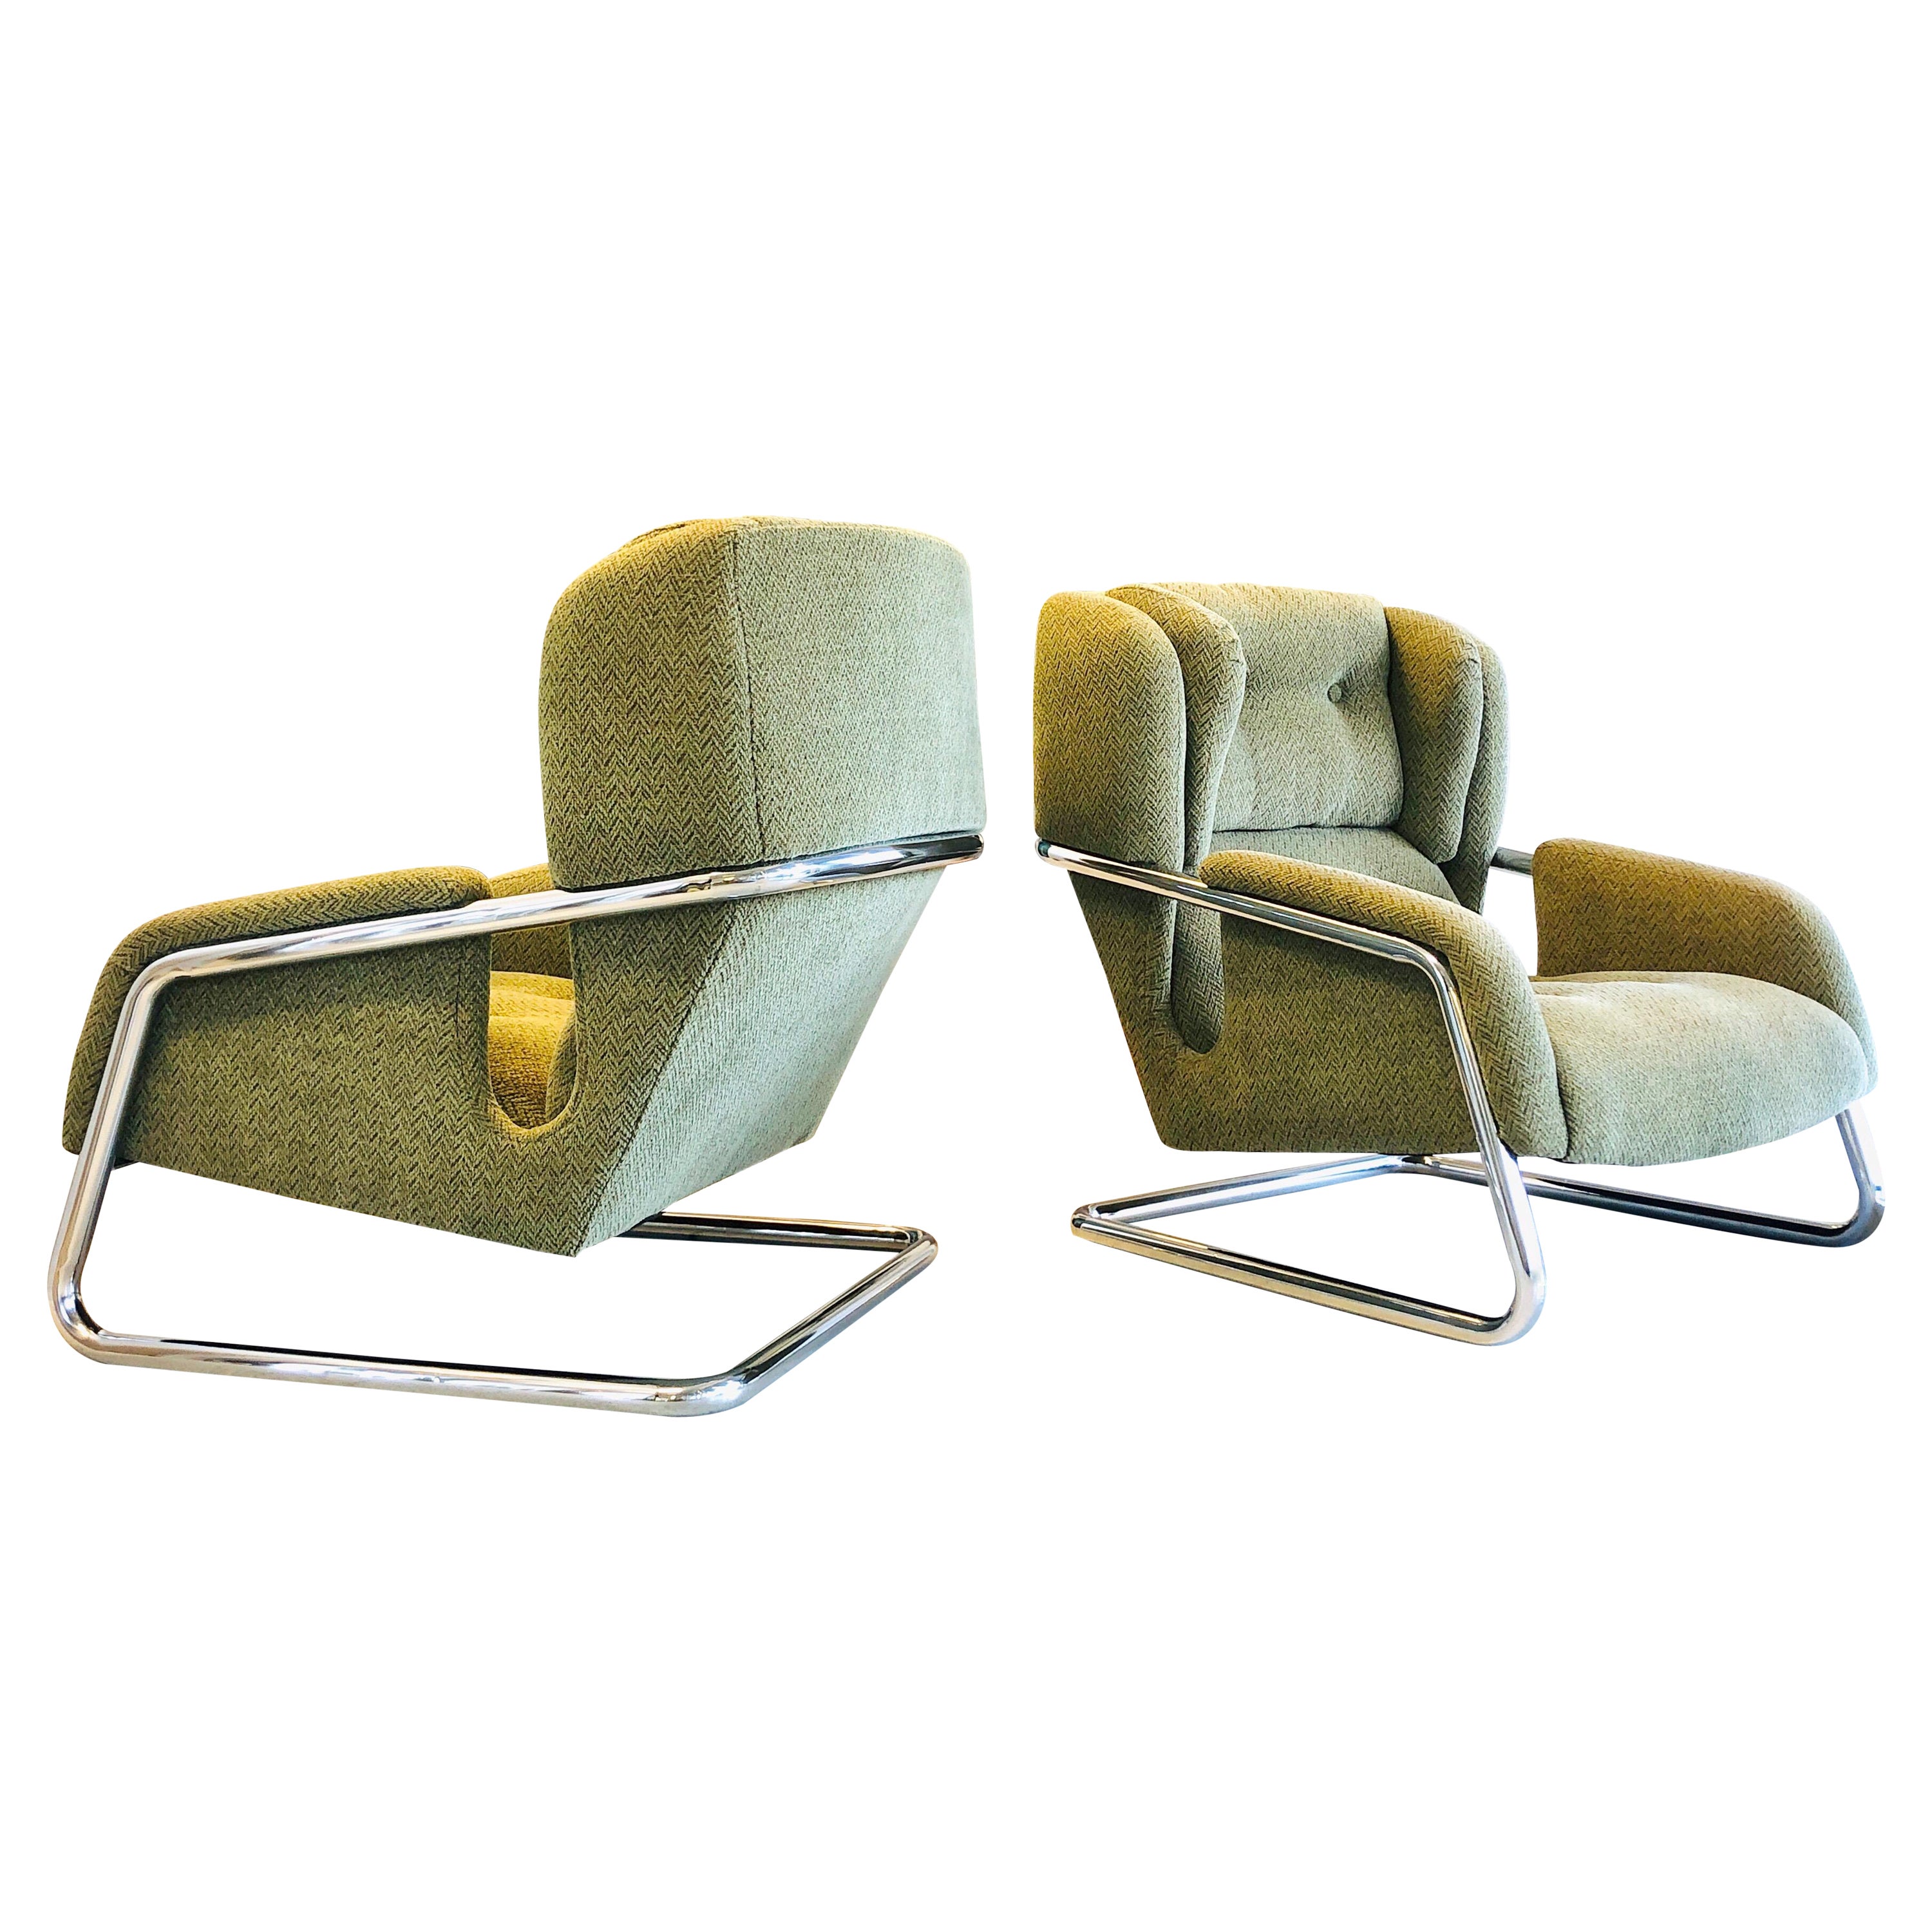 Pair of Extraordinary Italian Lounge Club Chairs Cantilevered, Italy, 1970s